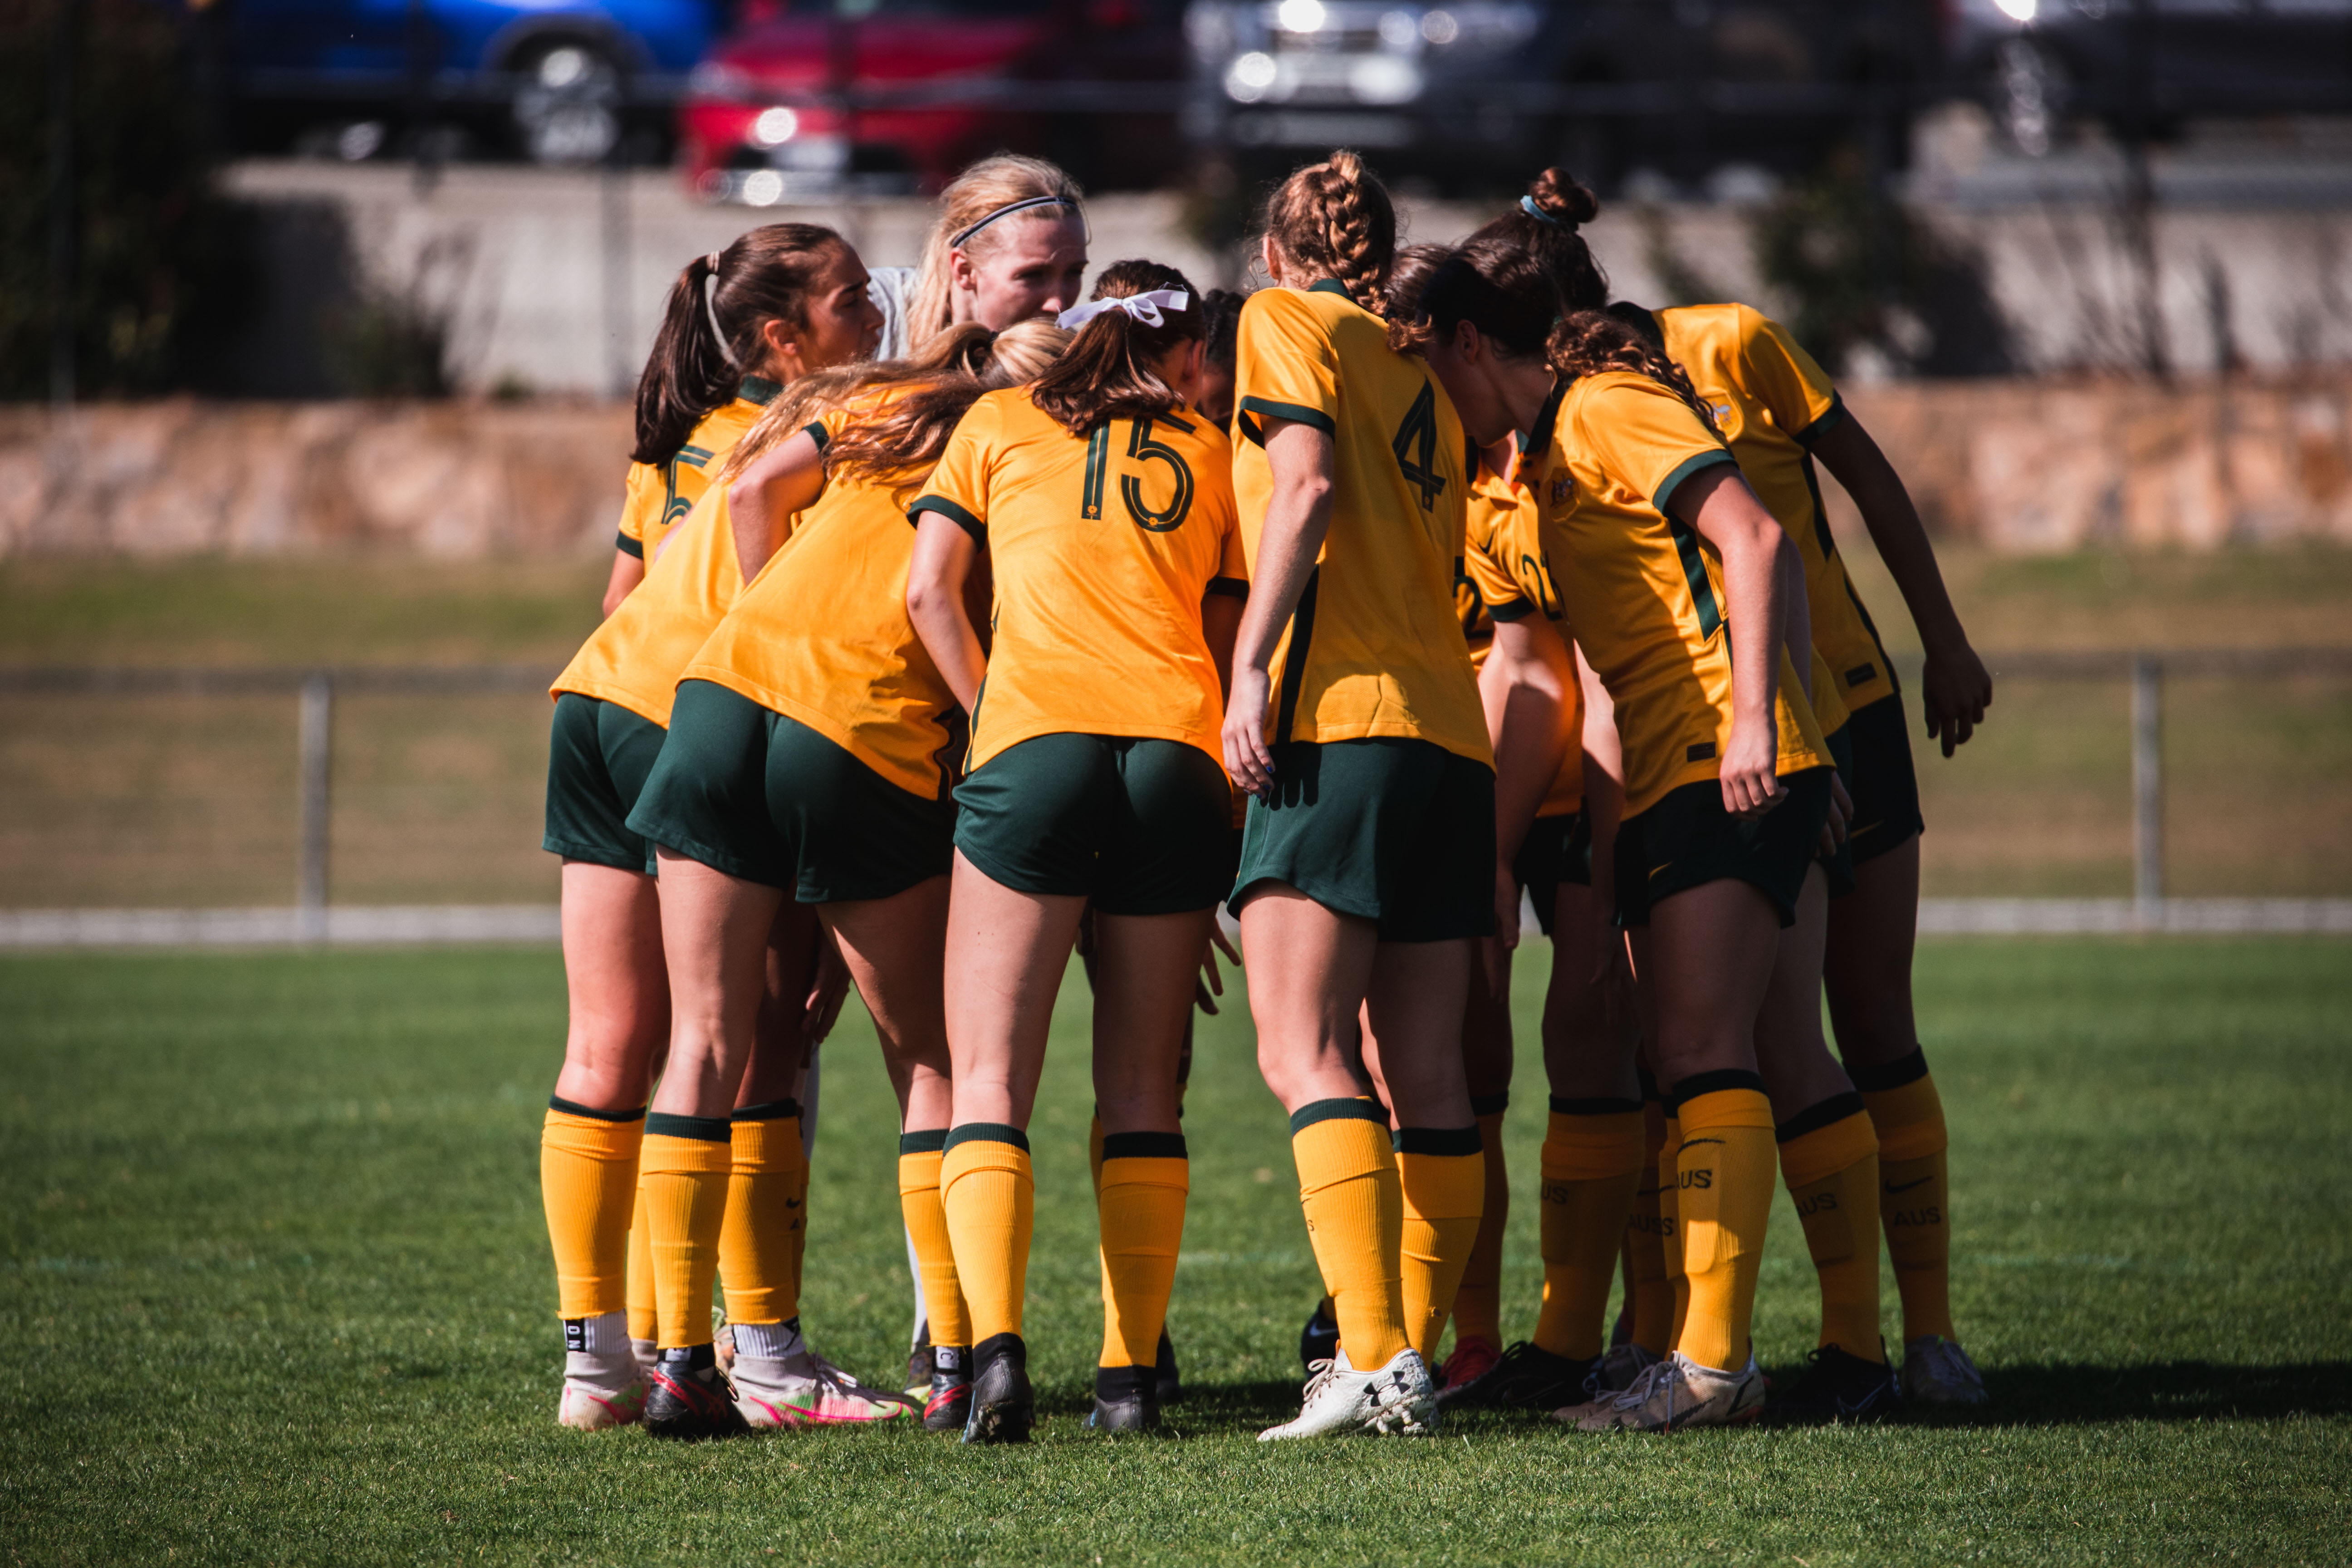 The CommBank Young Matildas in their international friendly against New Zealand in Canberra, April 2022. (Photo: Ann Odong / Football Australia)